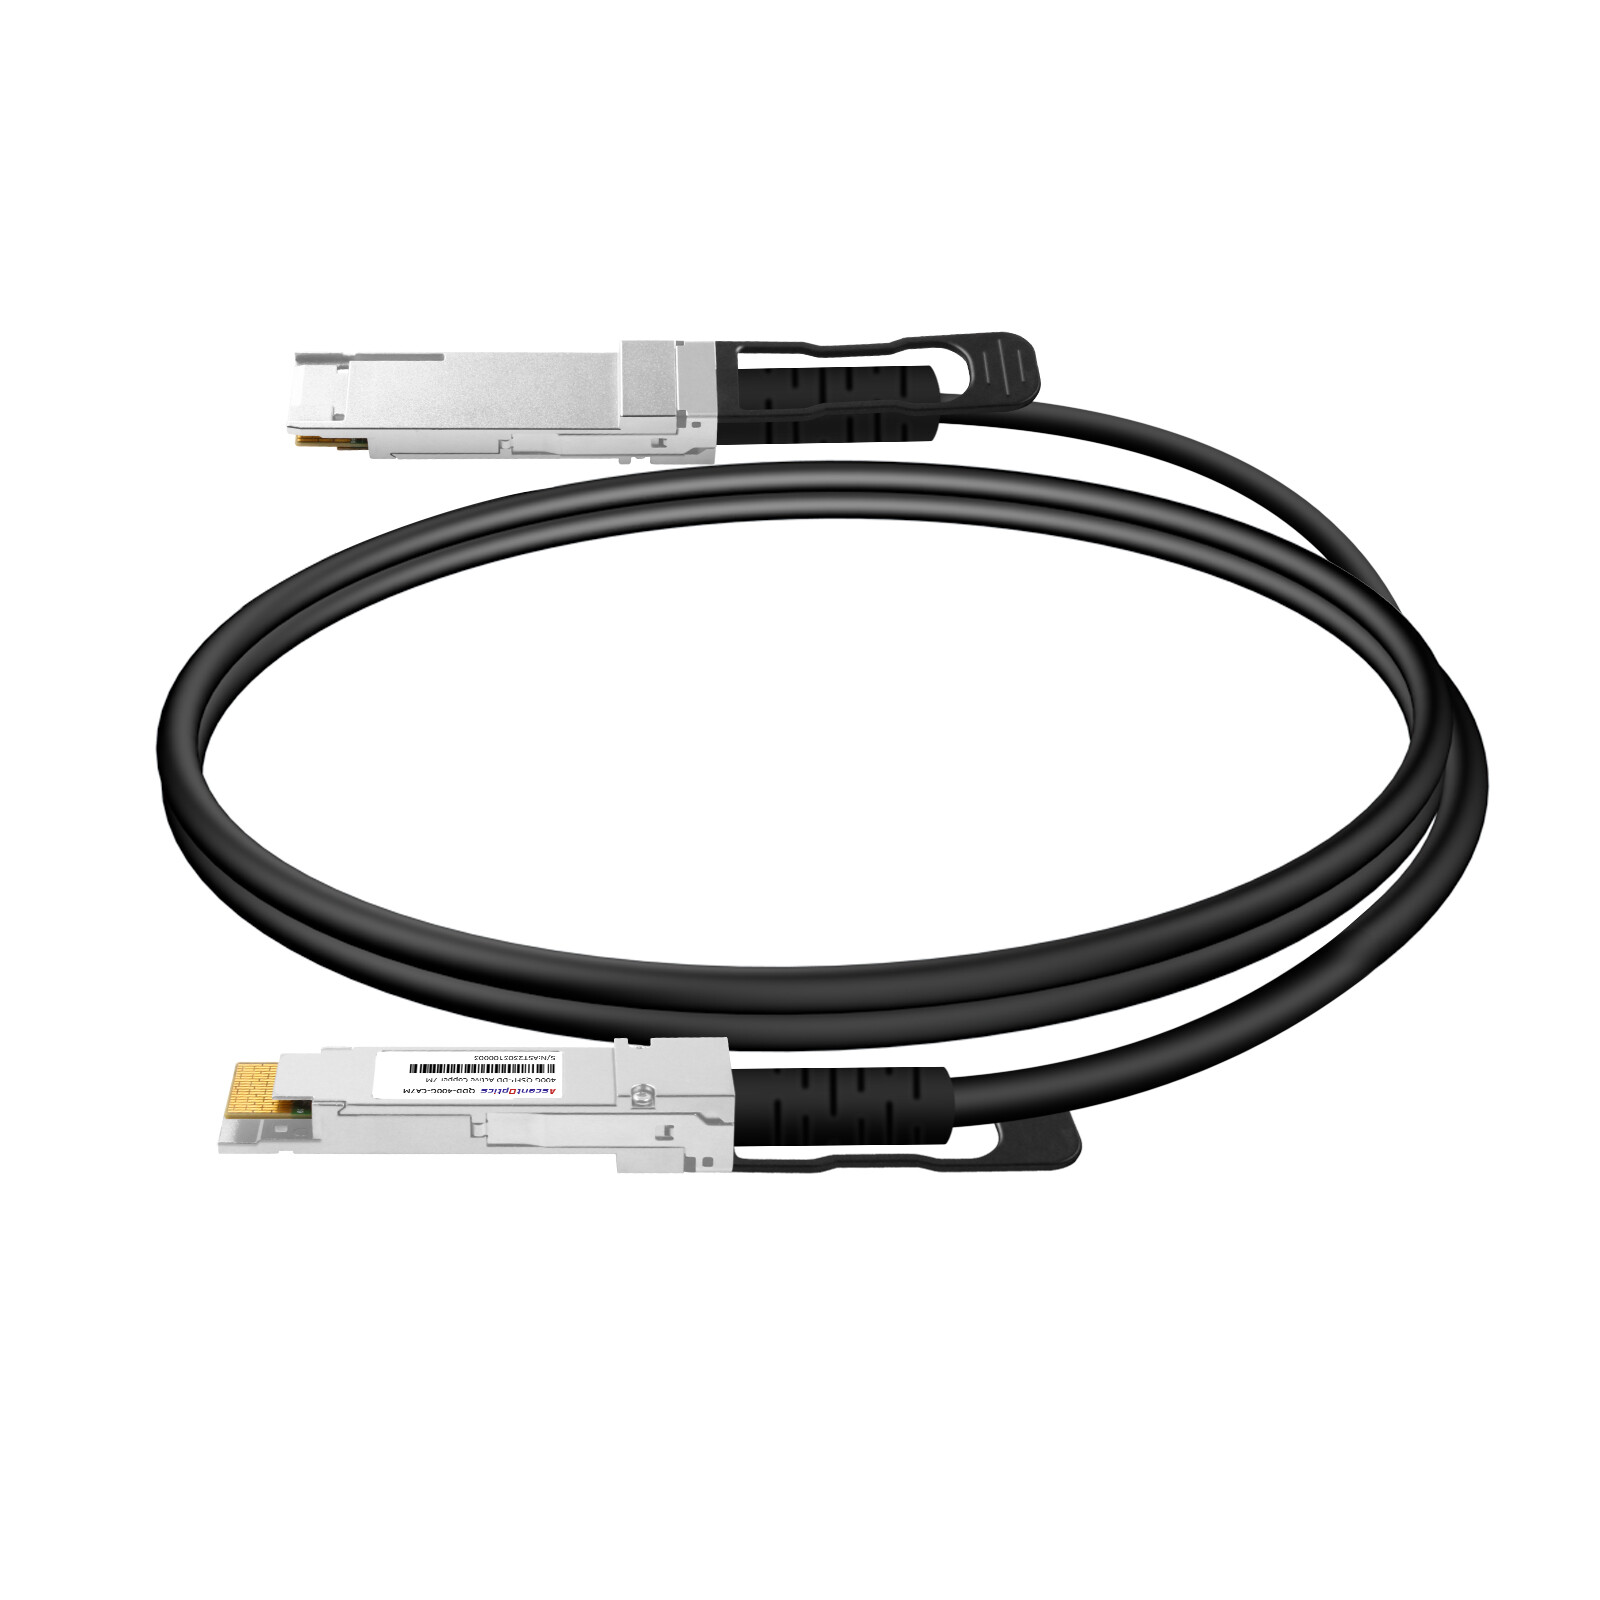 400G QSFP-DD Copper DAC Cable,7 Meters,Active